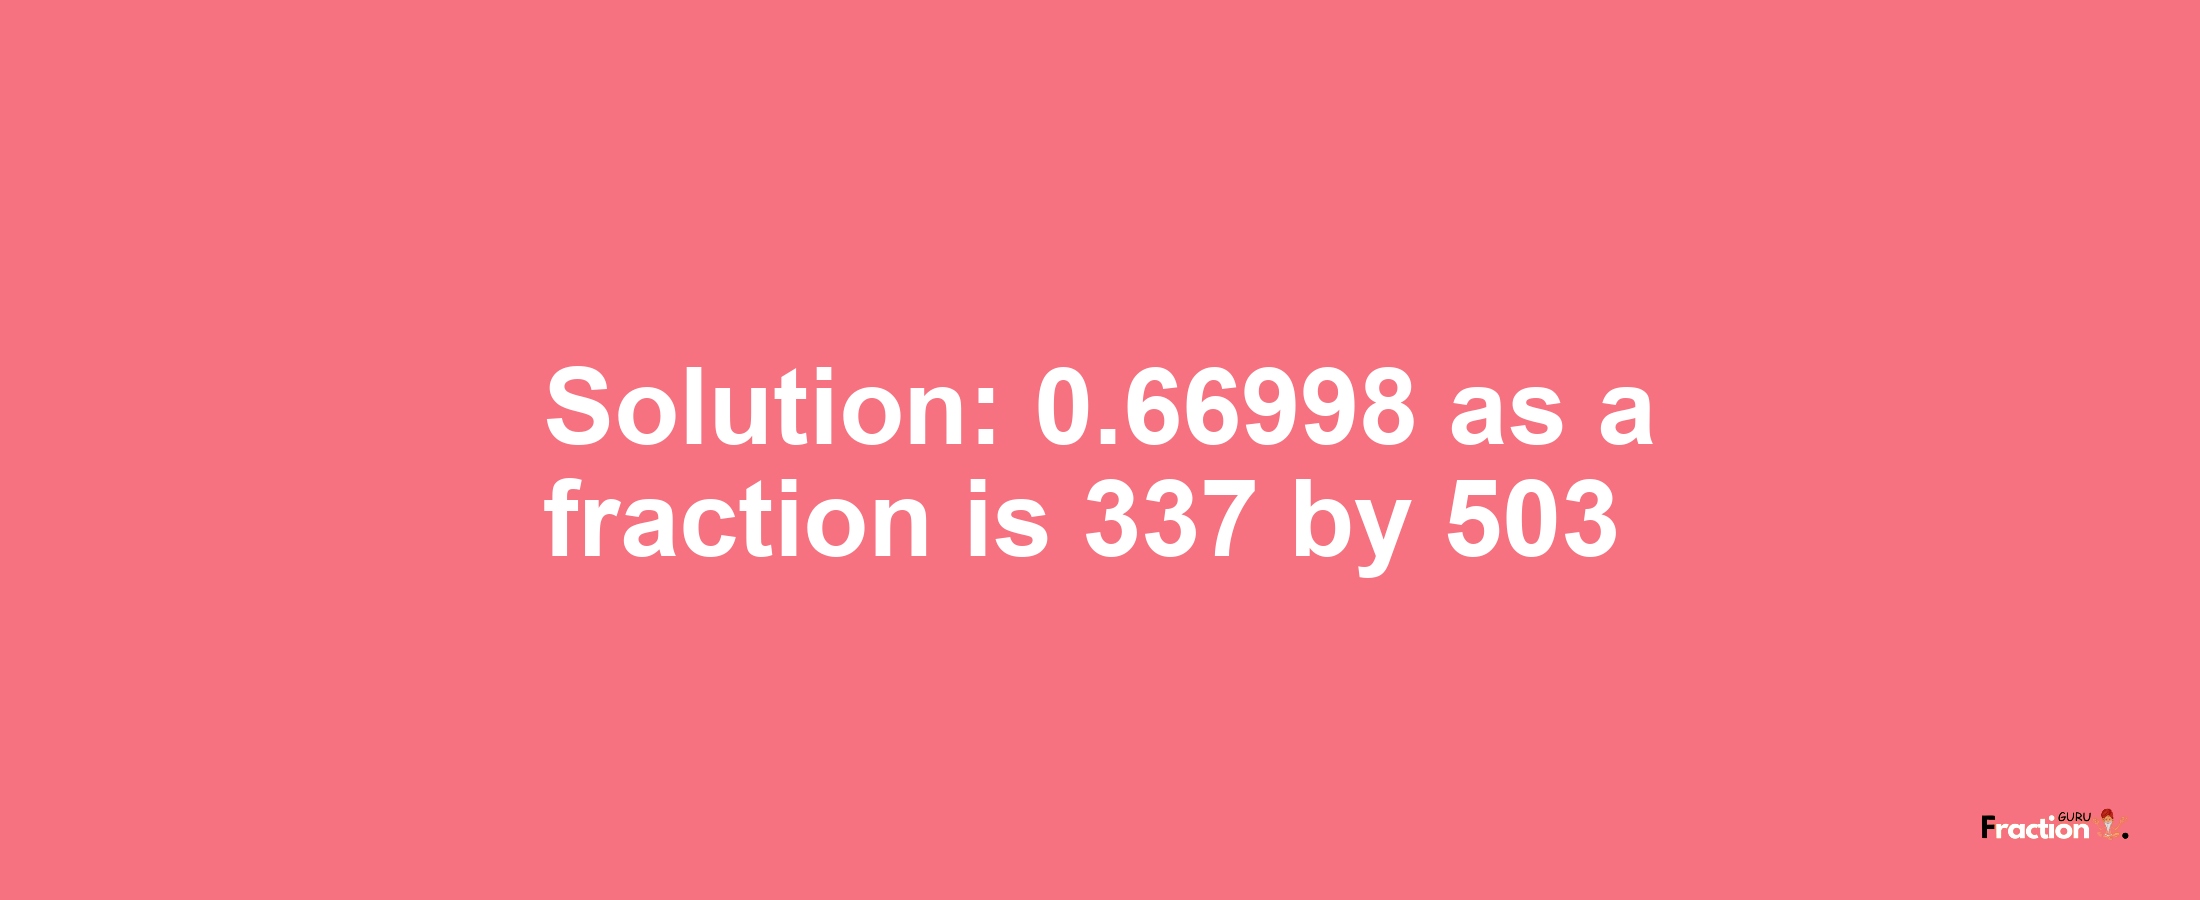 Solution:0.66998 as a fraction is 337/503